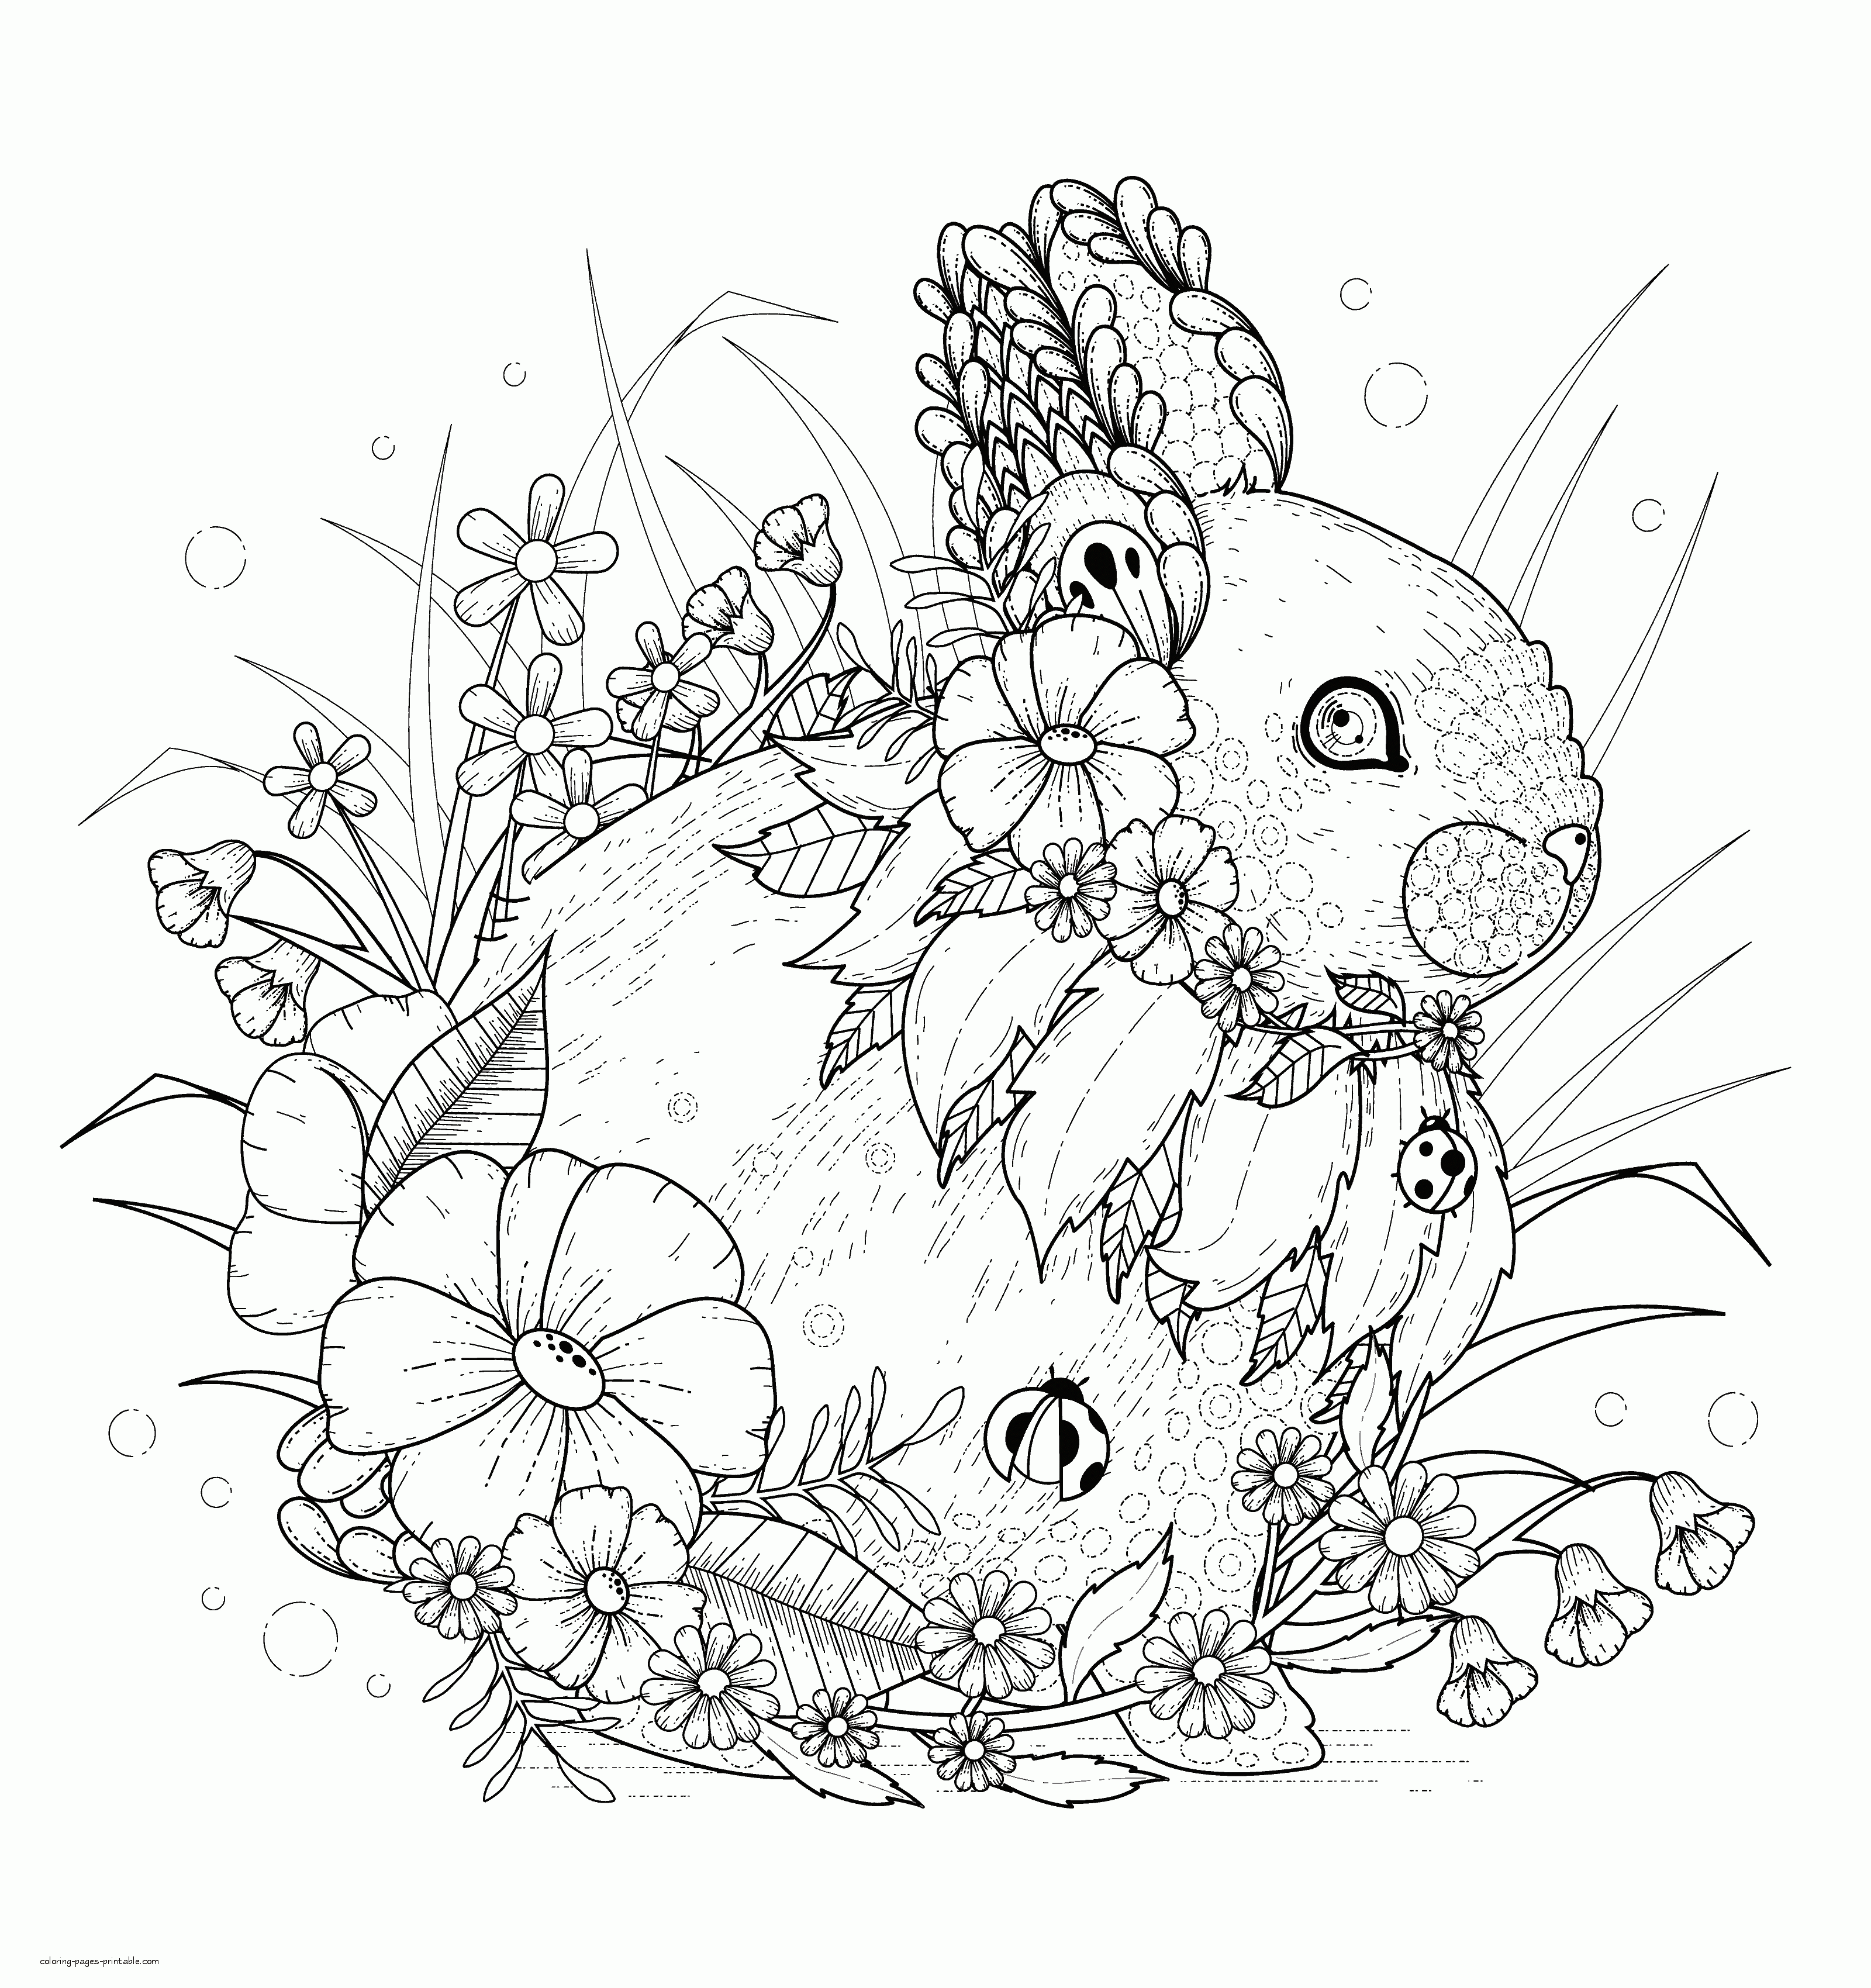 Rabbit coloring pages adult animal book coloring